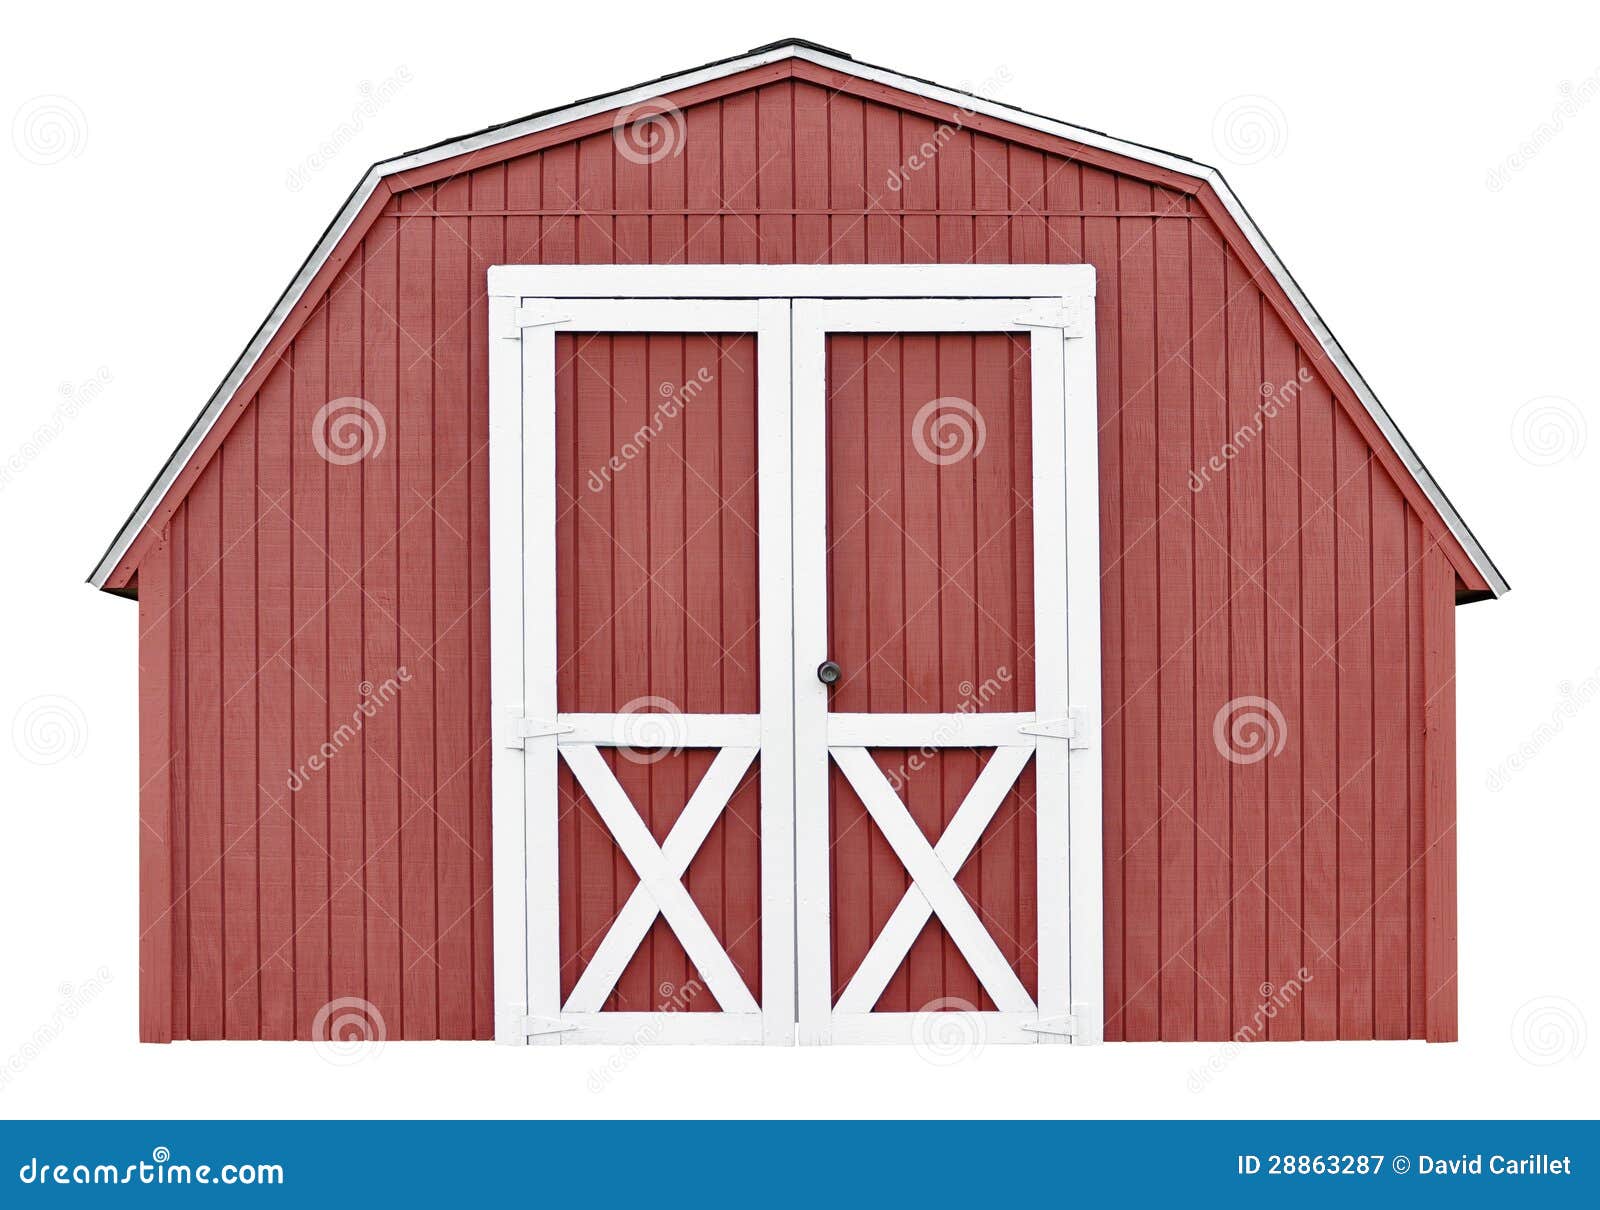 Shed Equipment Clip Art